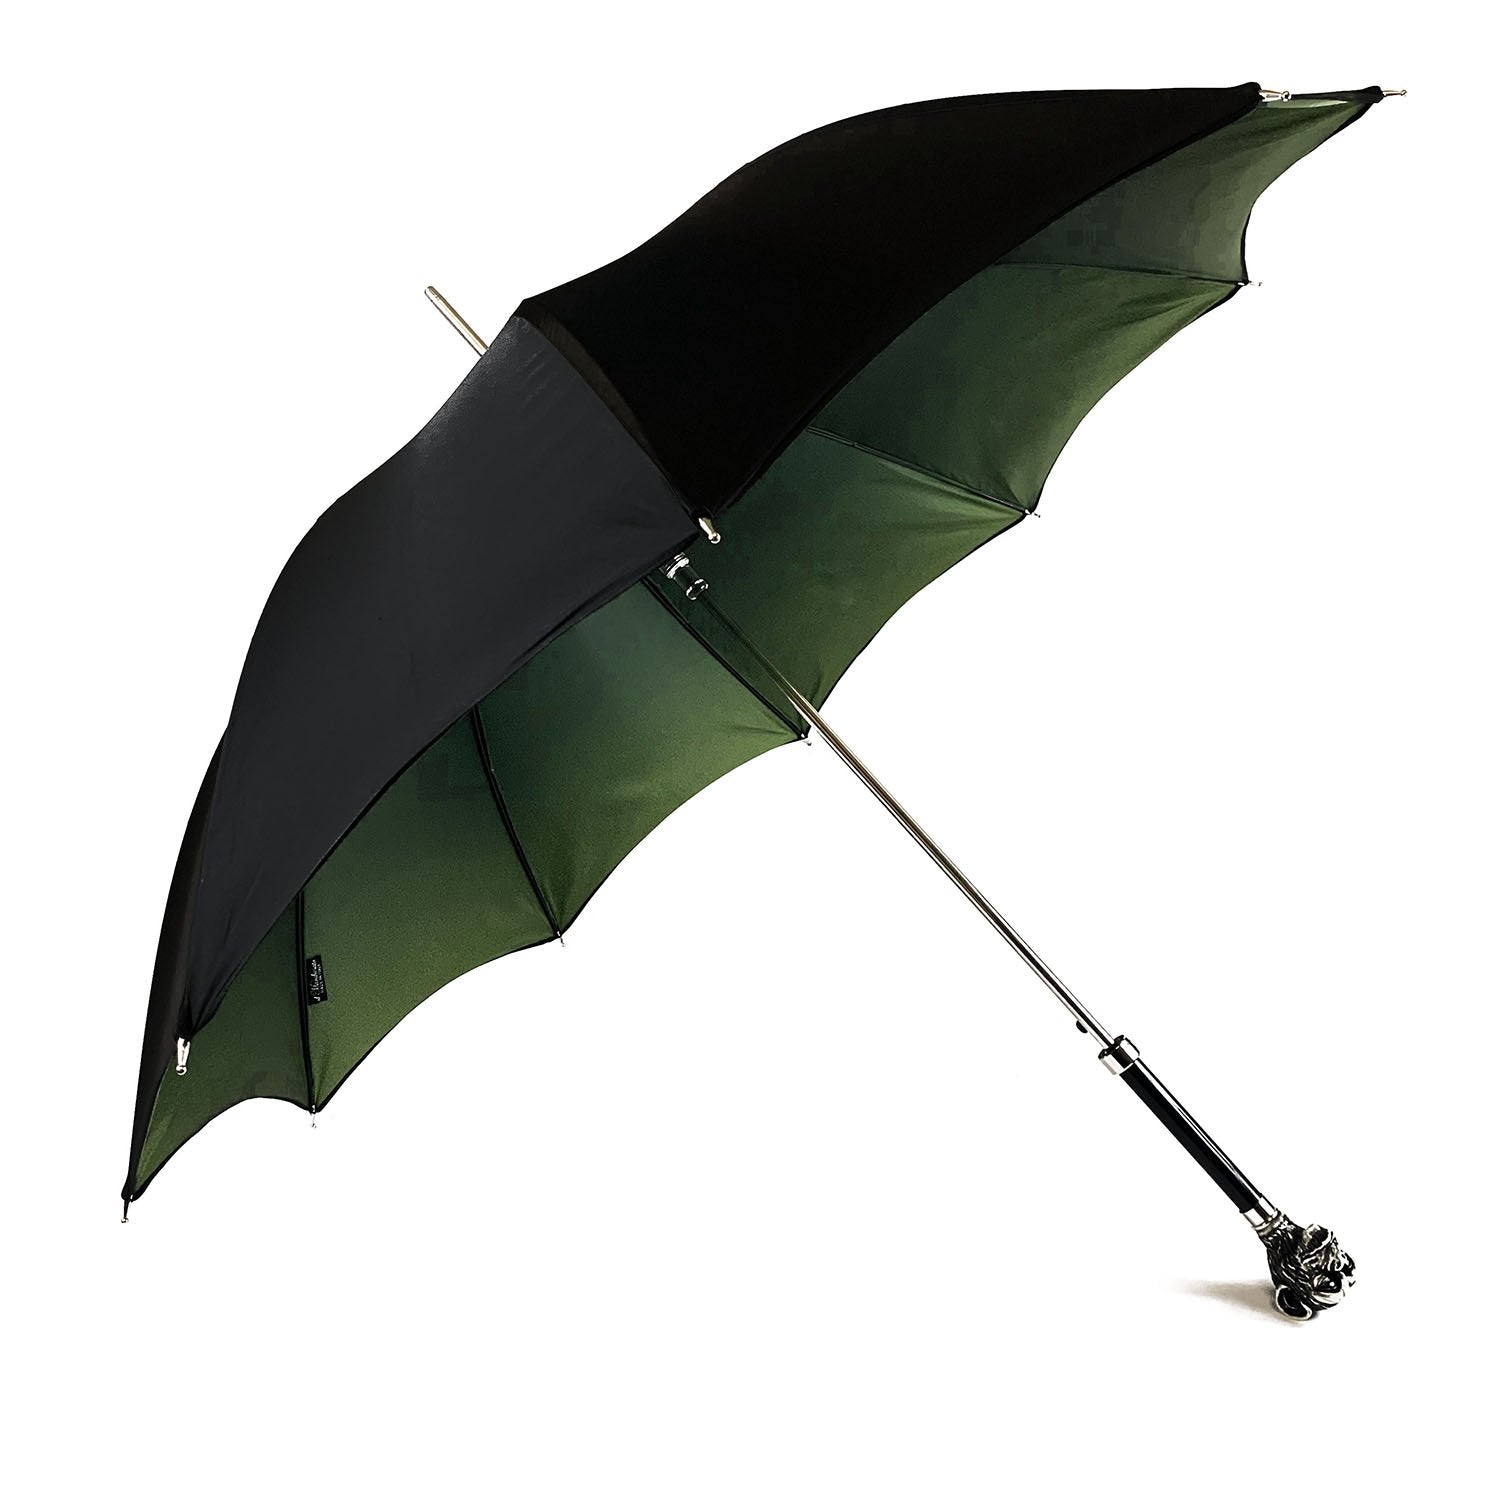 Exclusive umbrella with hand-painted monkey handle - IL MARCHESATO LUXURY UMBRELLAS, CANES AND SHOEHORNS